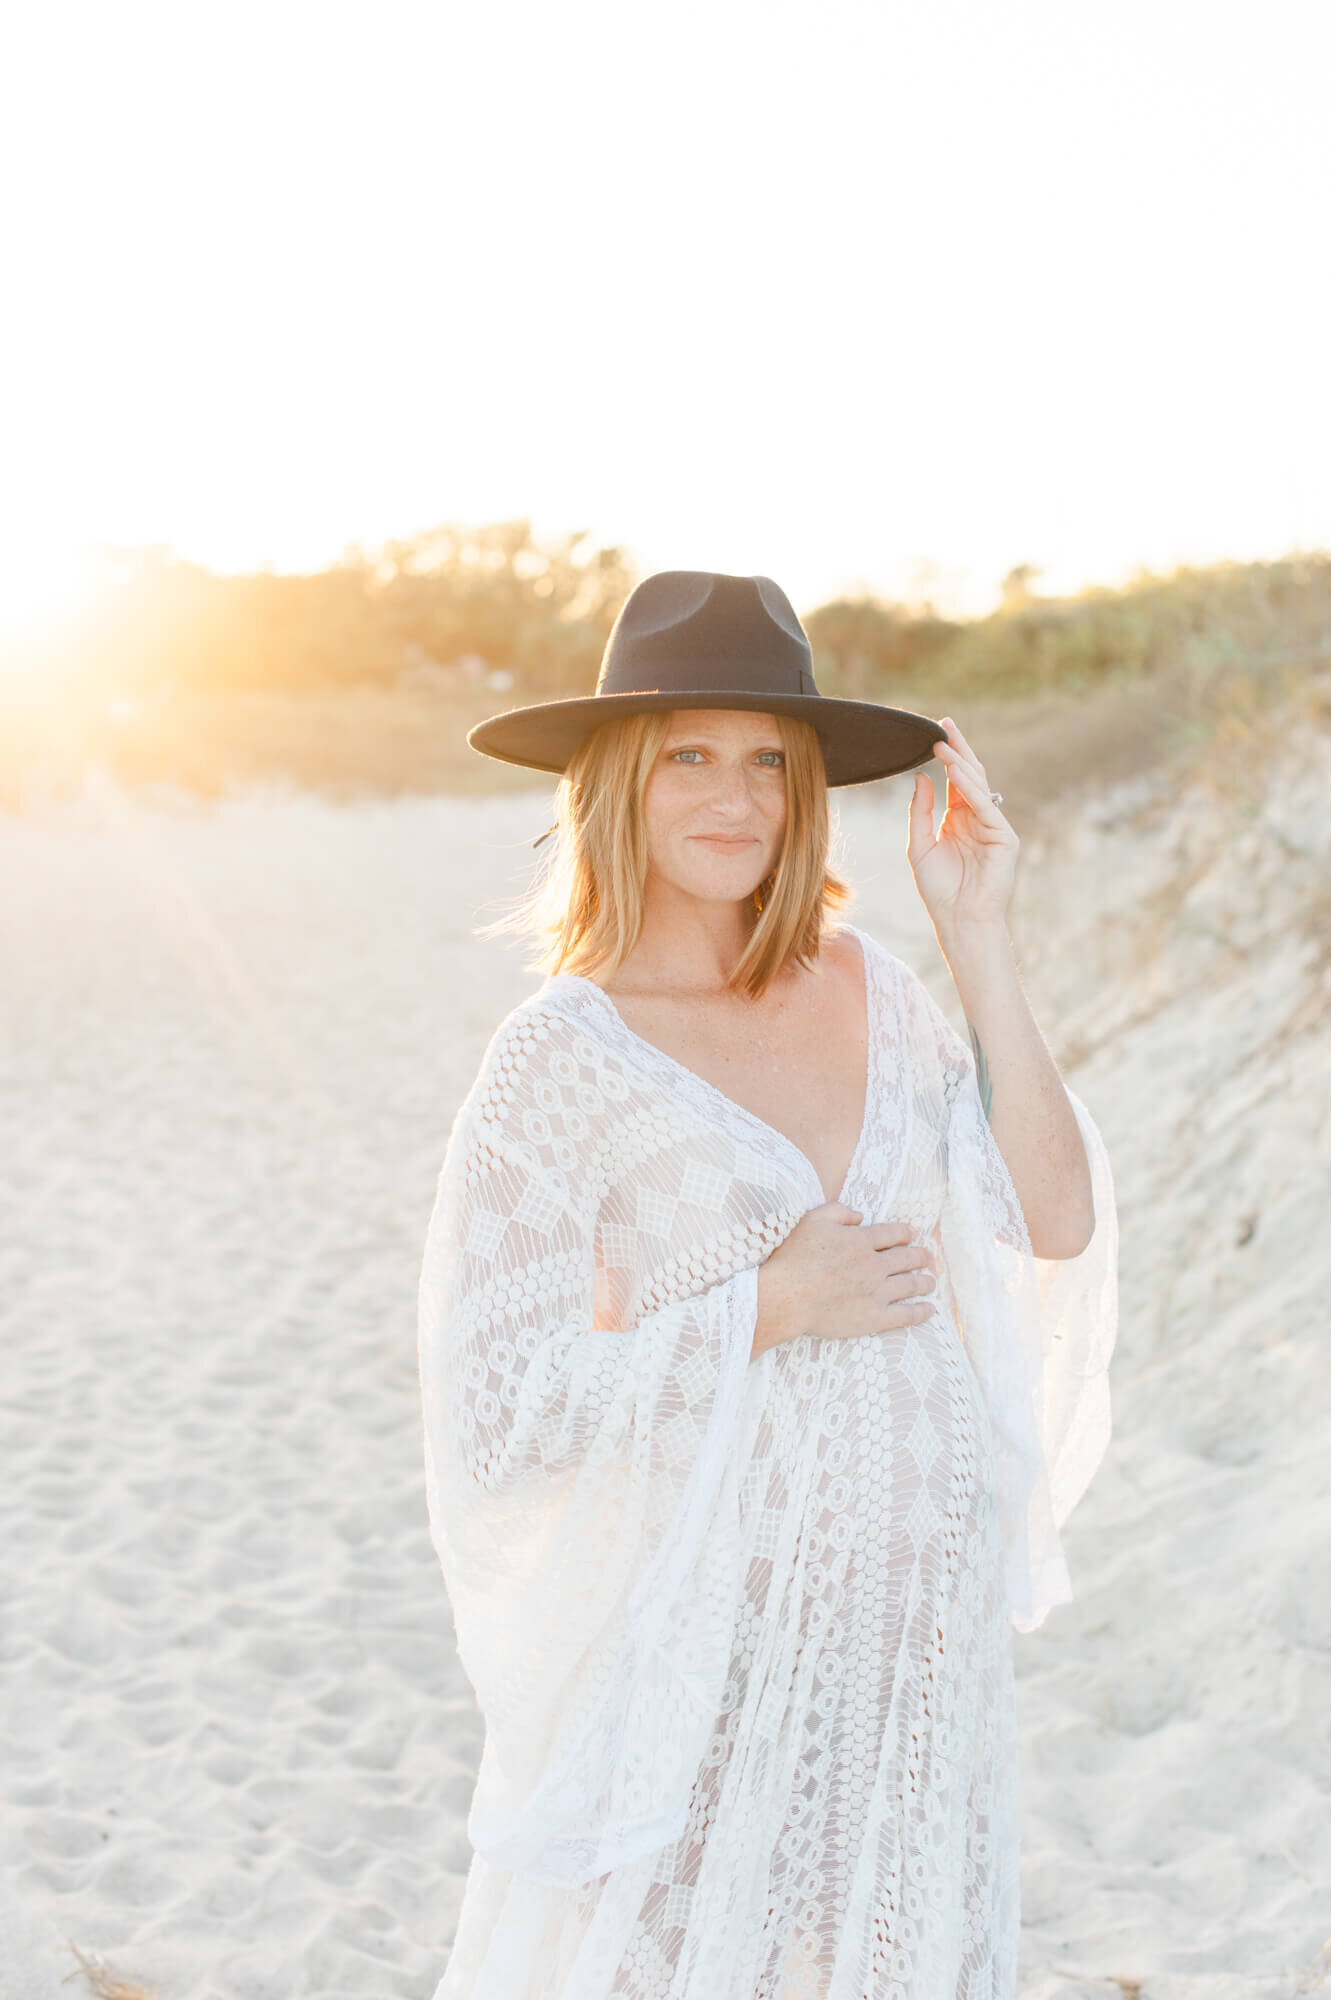 Expectant mother holds her wide brim hat and places her hand on her belly while looking into the camera at sunset